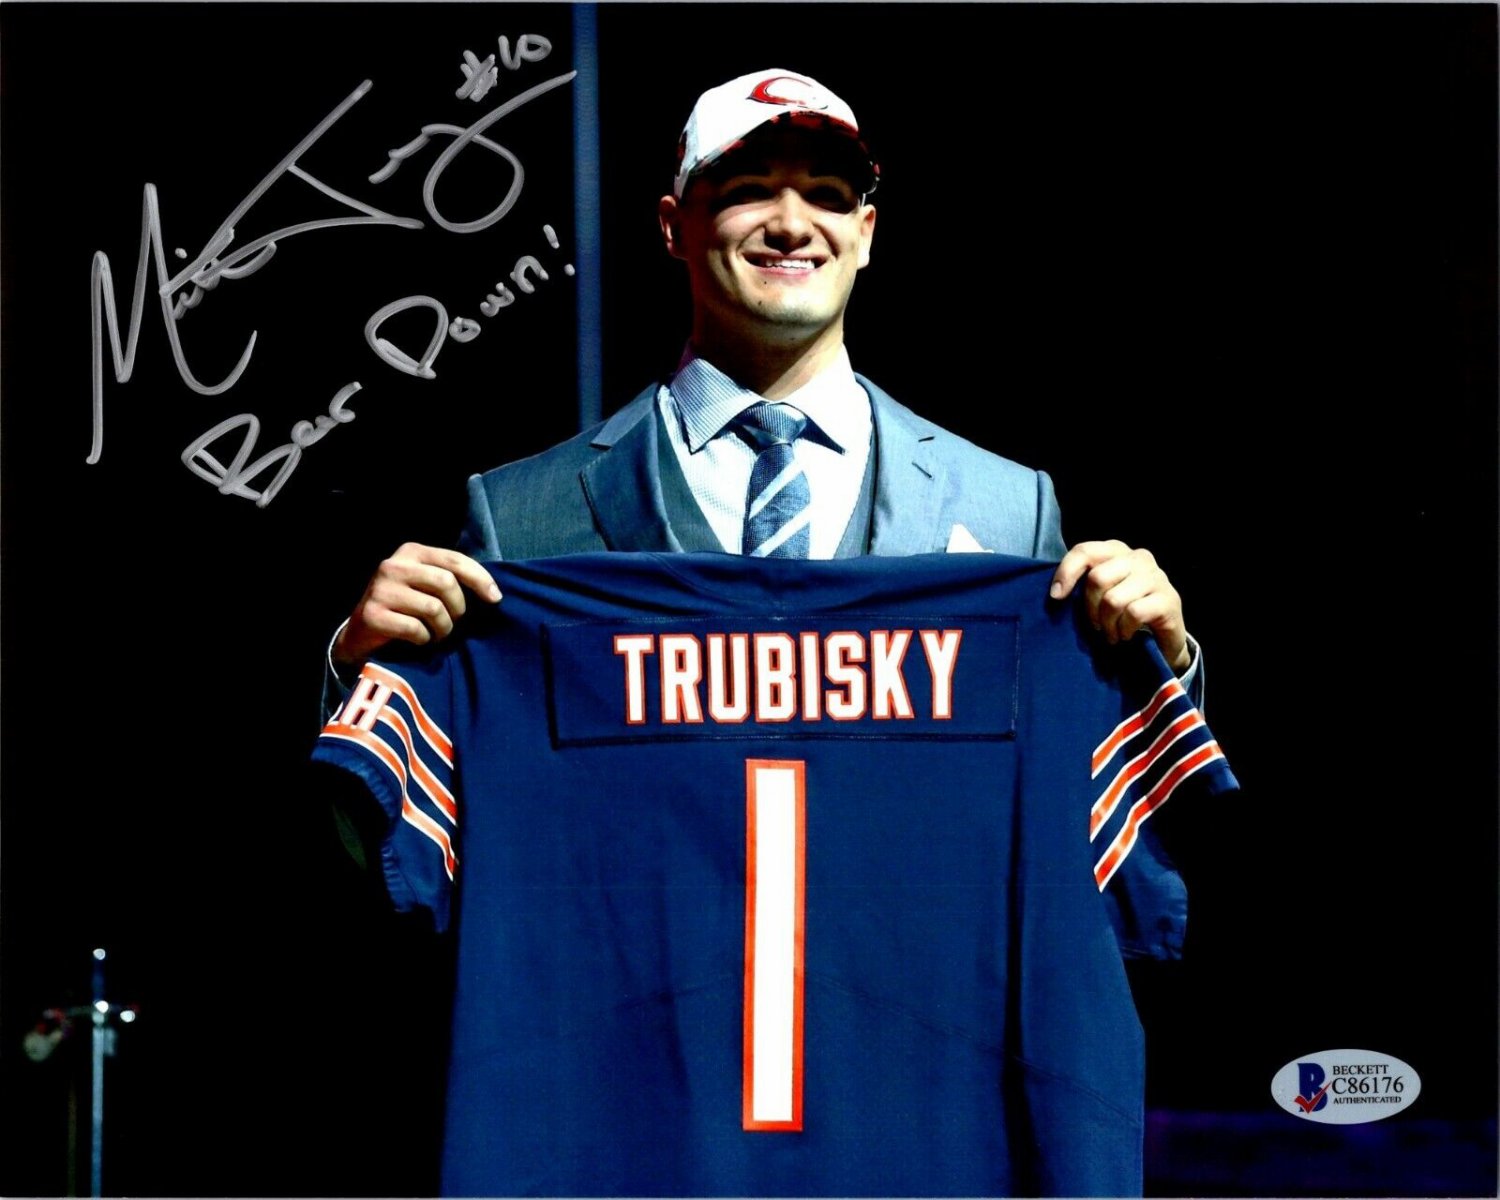 mitchell trubisky autographed jersey